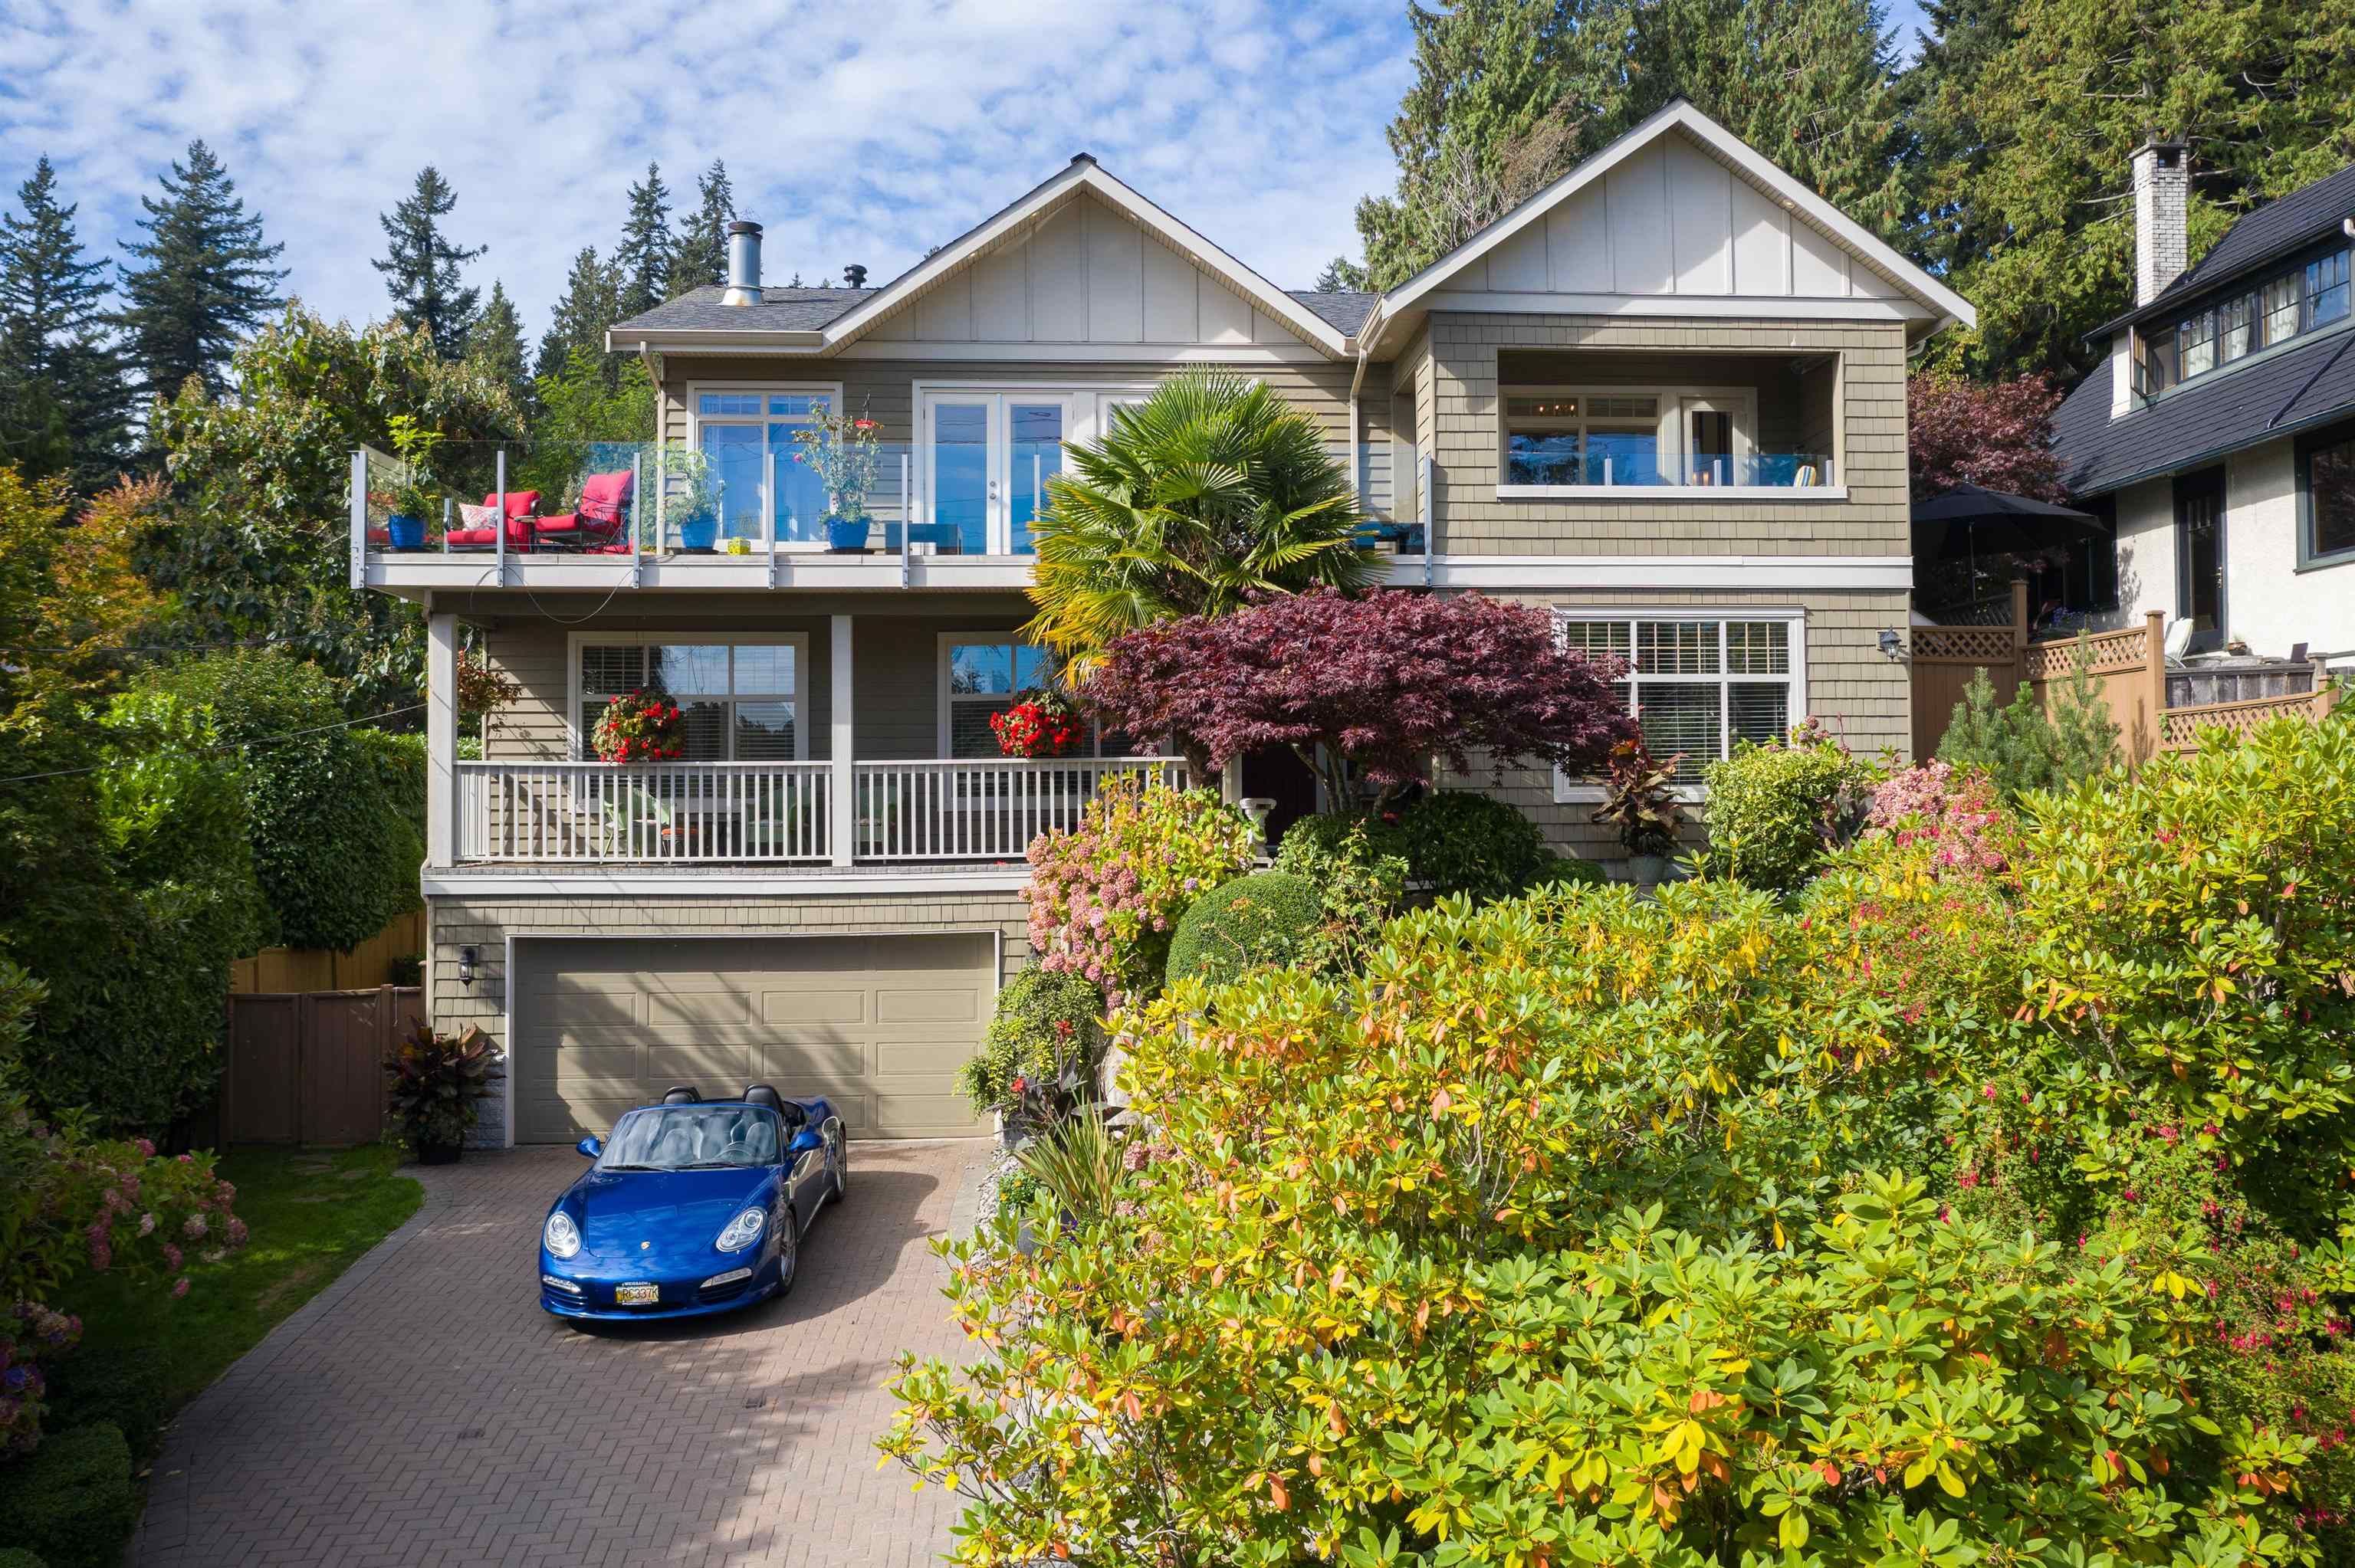 Main Photo: 435 N OXLEY Street in West Vancouver: West Bay House for sale : MLS®# R2620614